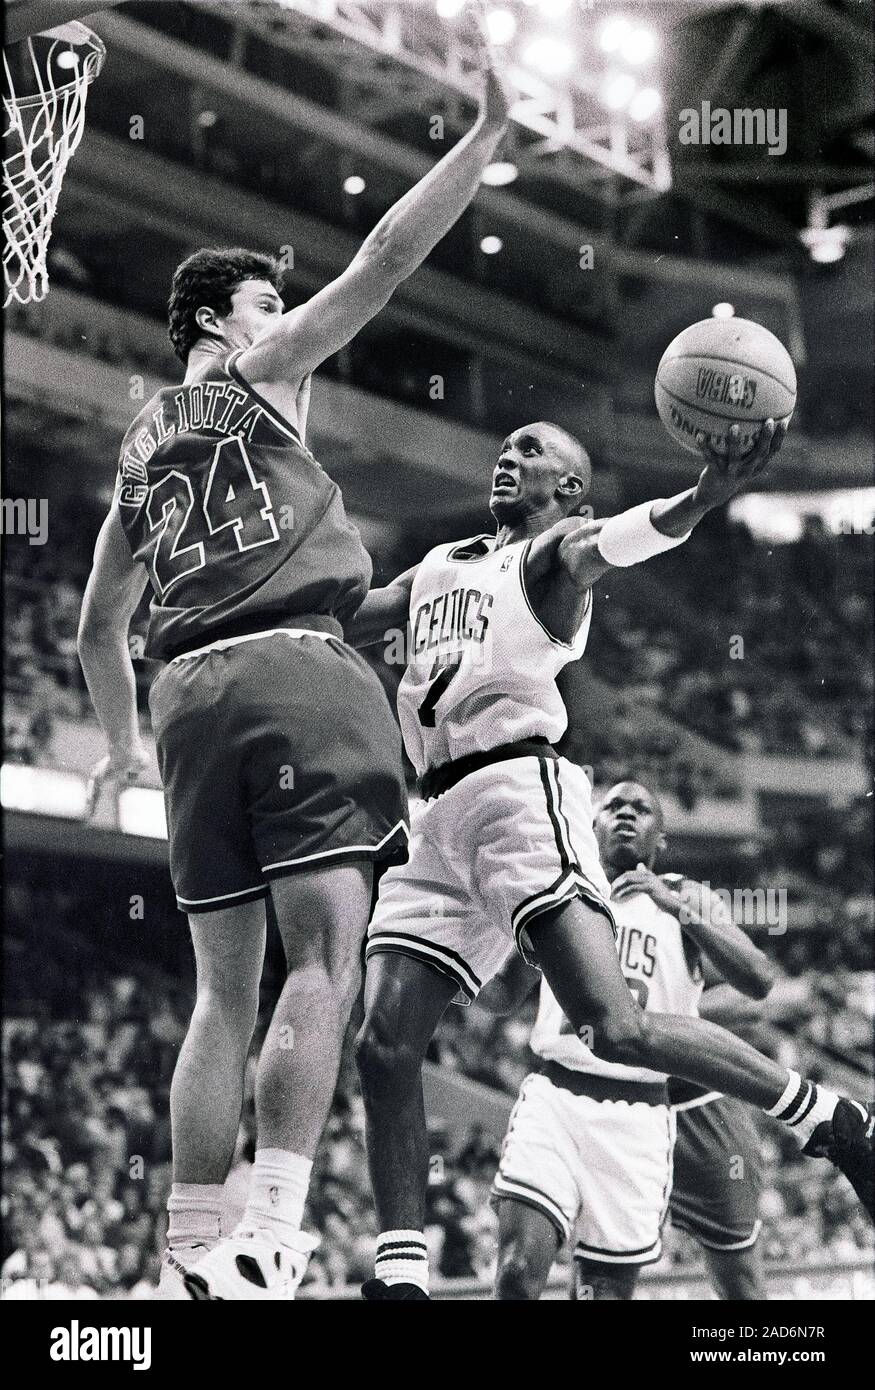 Boston Celtics Dee Brown drives  the ball as Washington Bullets #24 Tom Gugliotta defends during basketball game action at the Boston Garden in Boston Ma USA Dec1,1993 photo by bill belknap Stock Photo